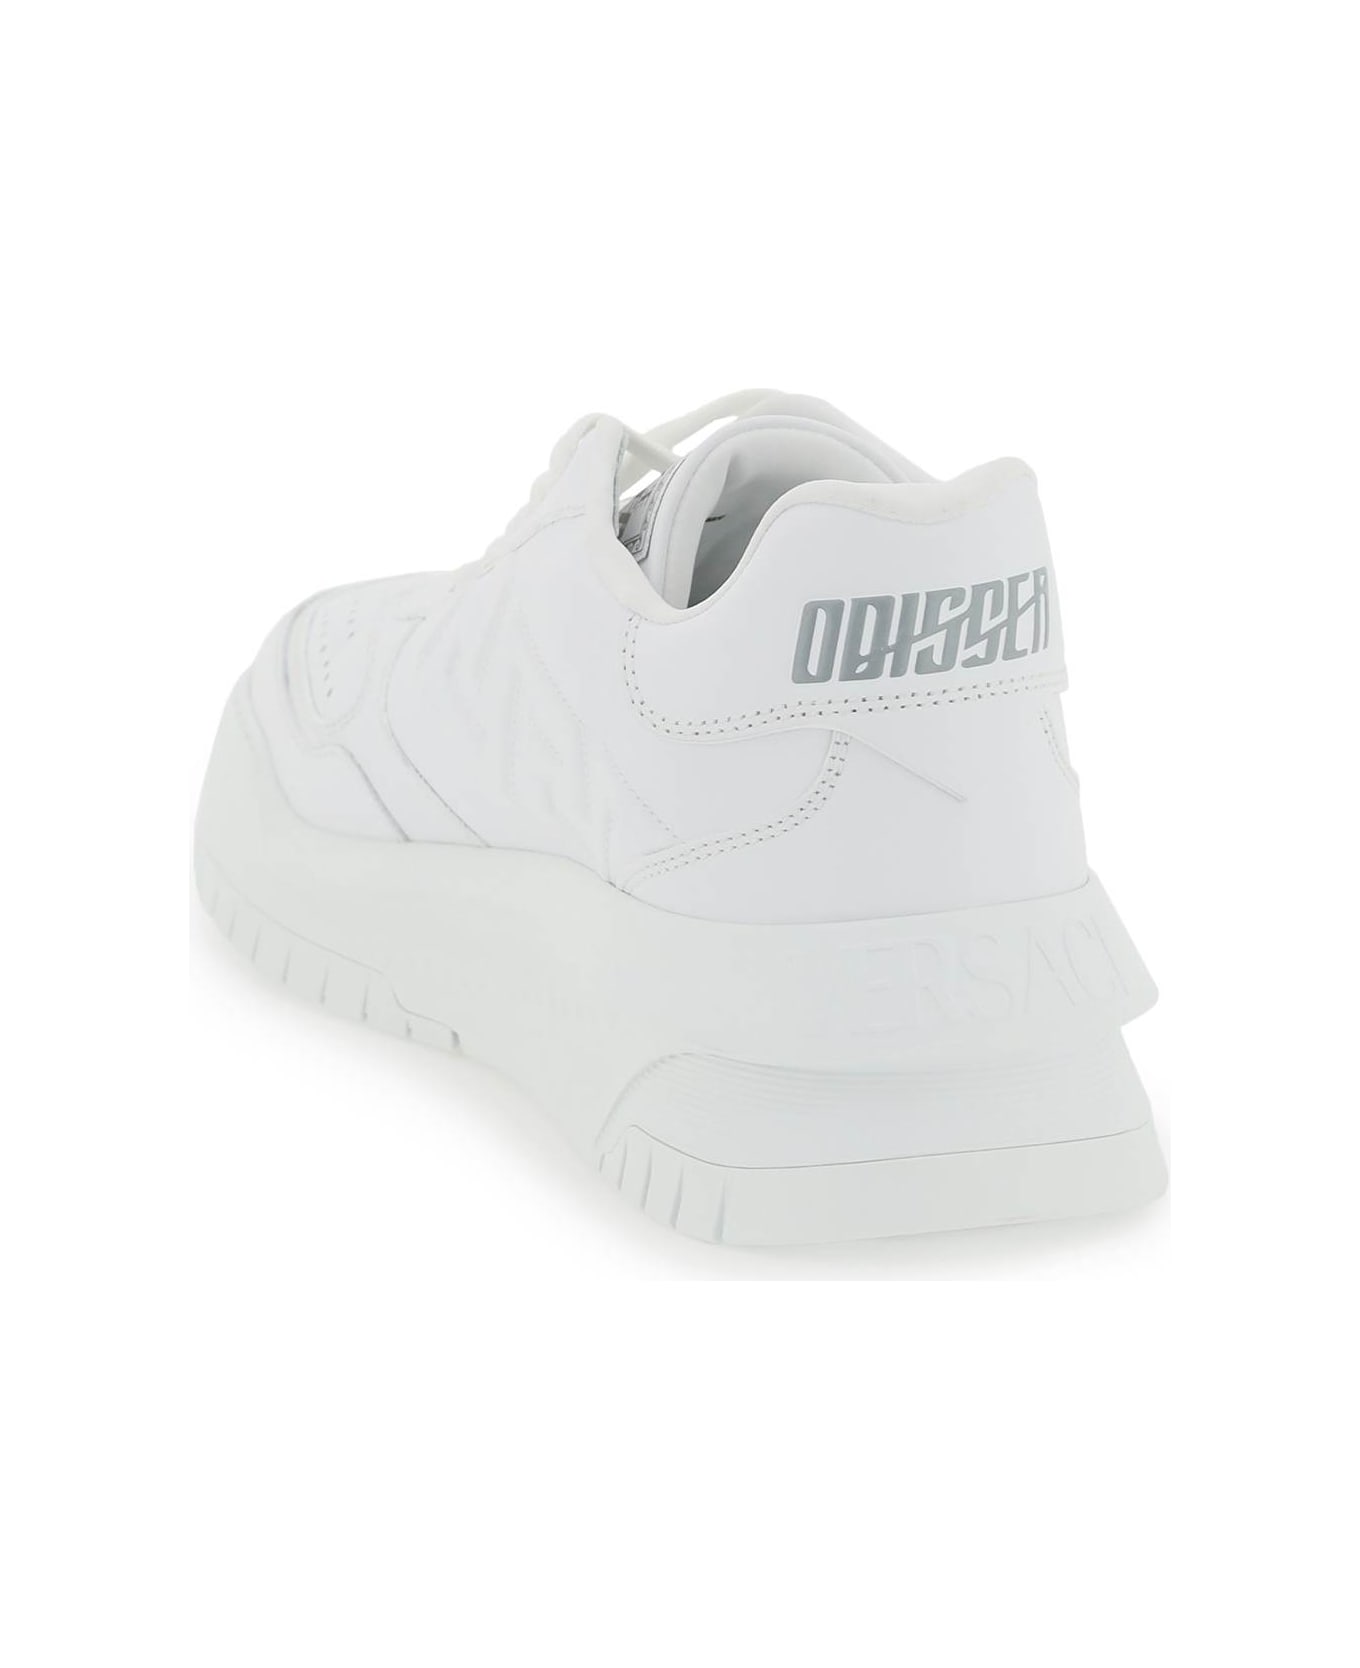 Versace 'odissea' Sneakers - White スニーカー